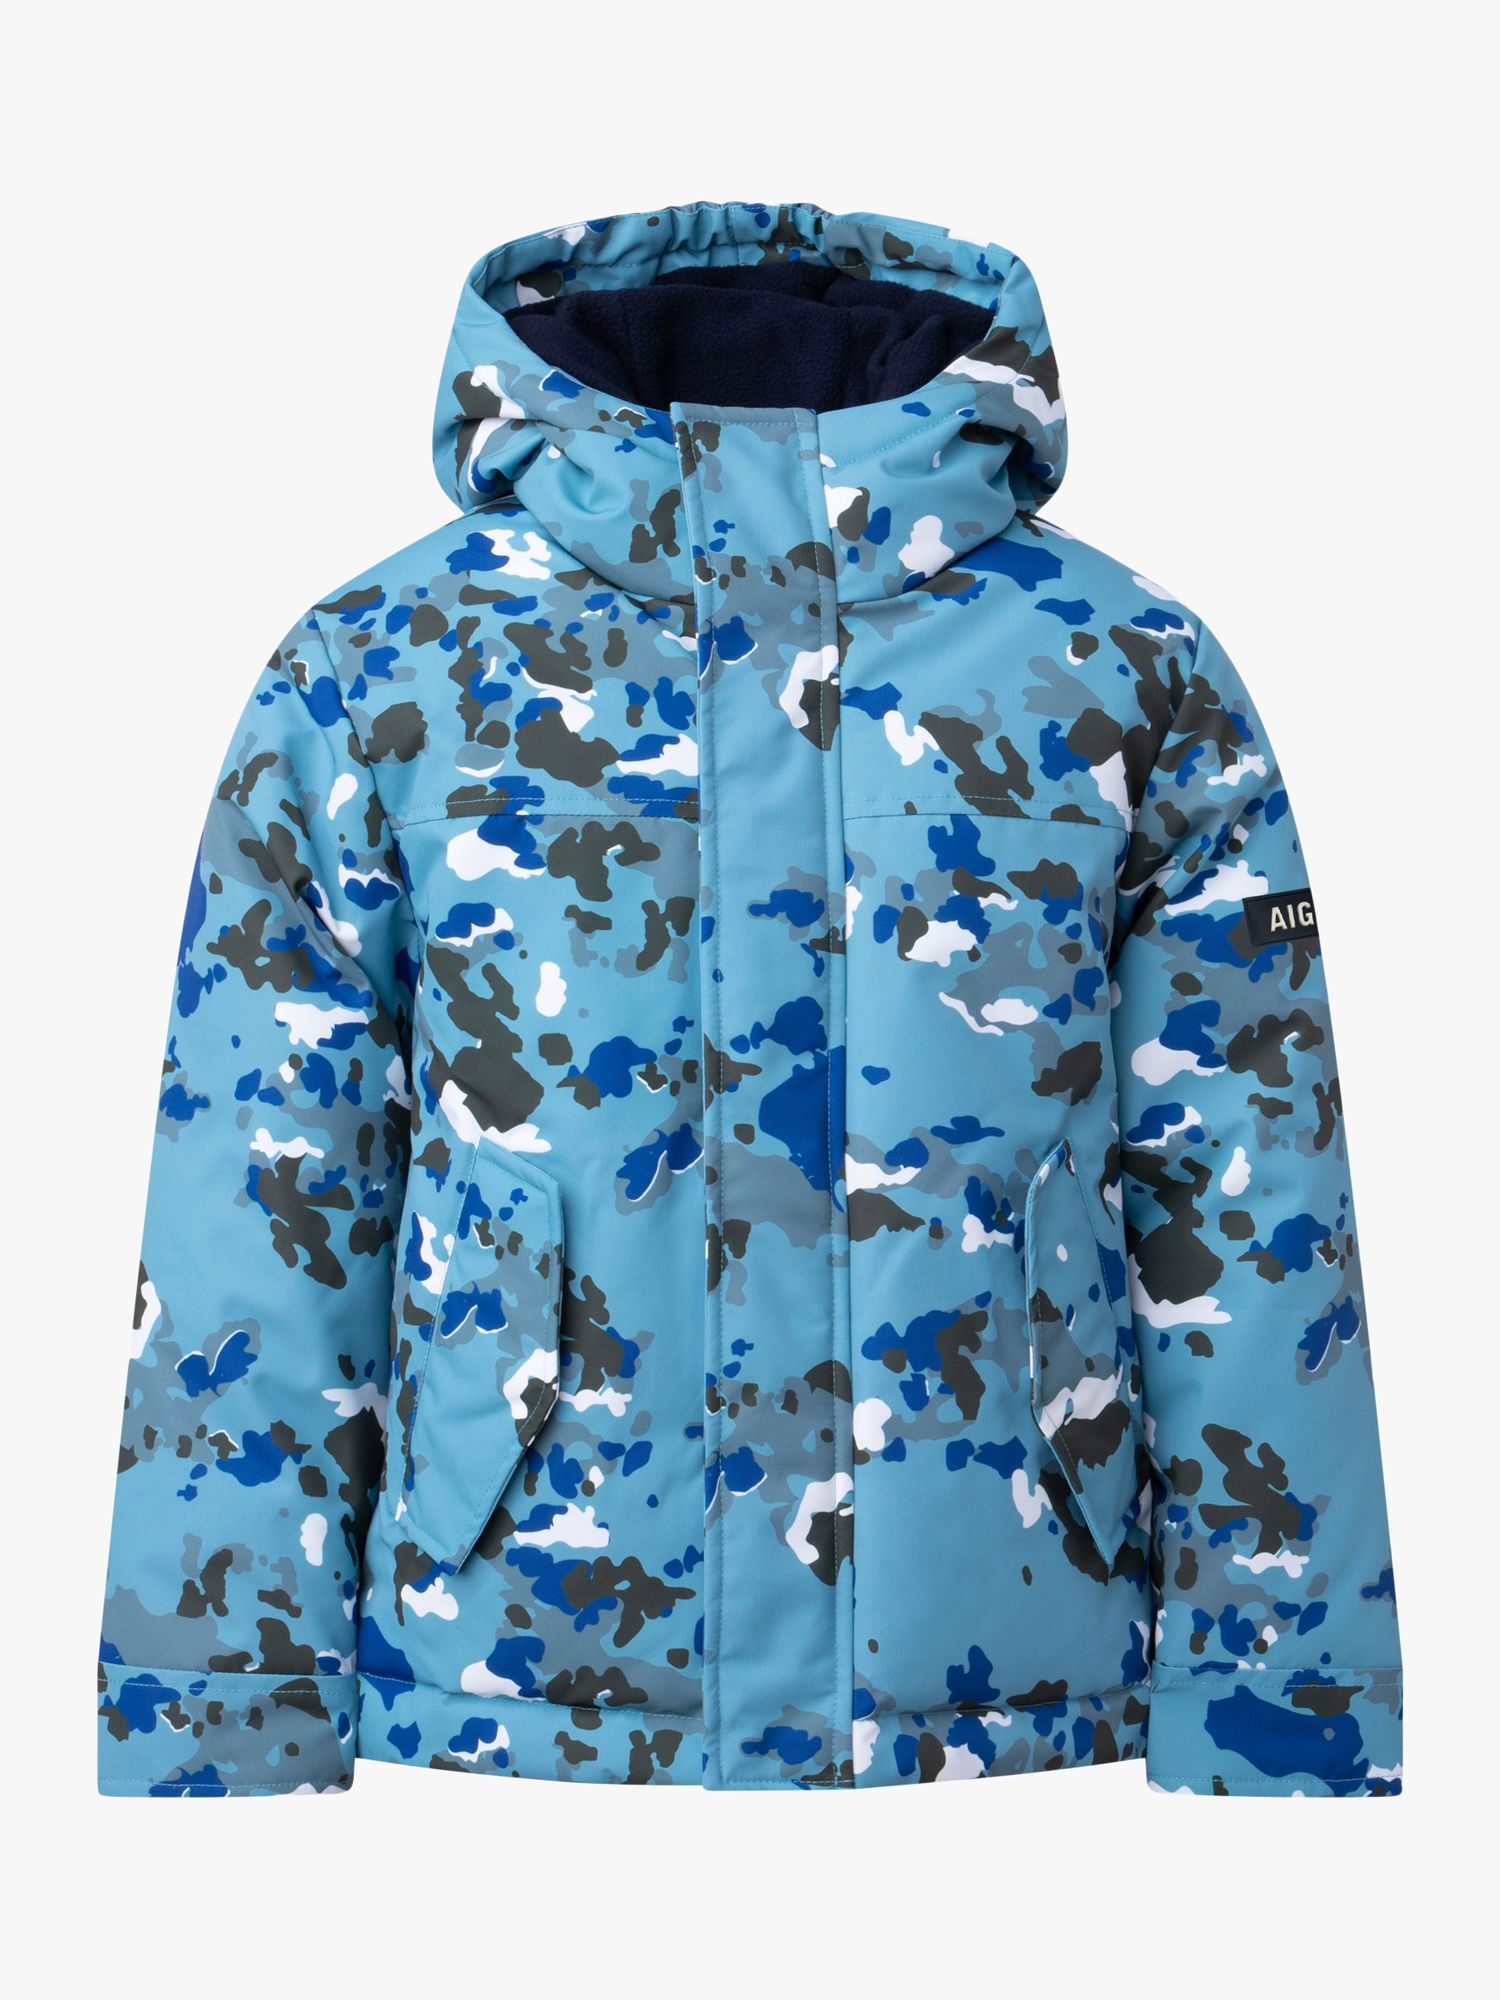 Aigle Kids' Abstract Camouflage Waterproof Parka Coat, Blue, 4 years